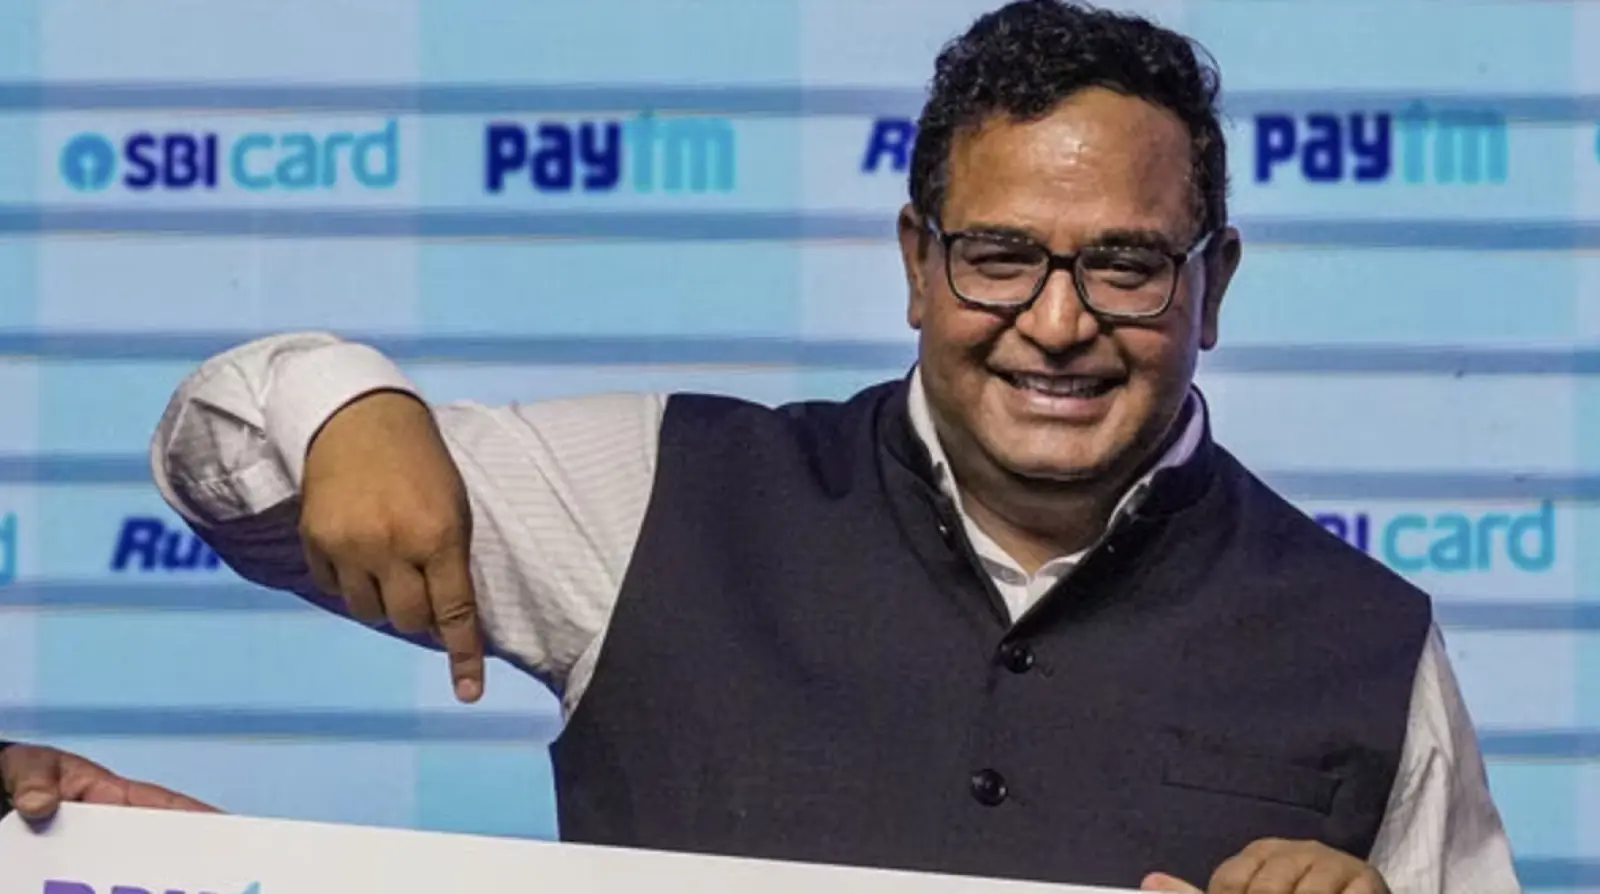 CEO of One97 Communications said this about Paytm, know the complete details